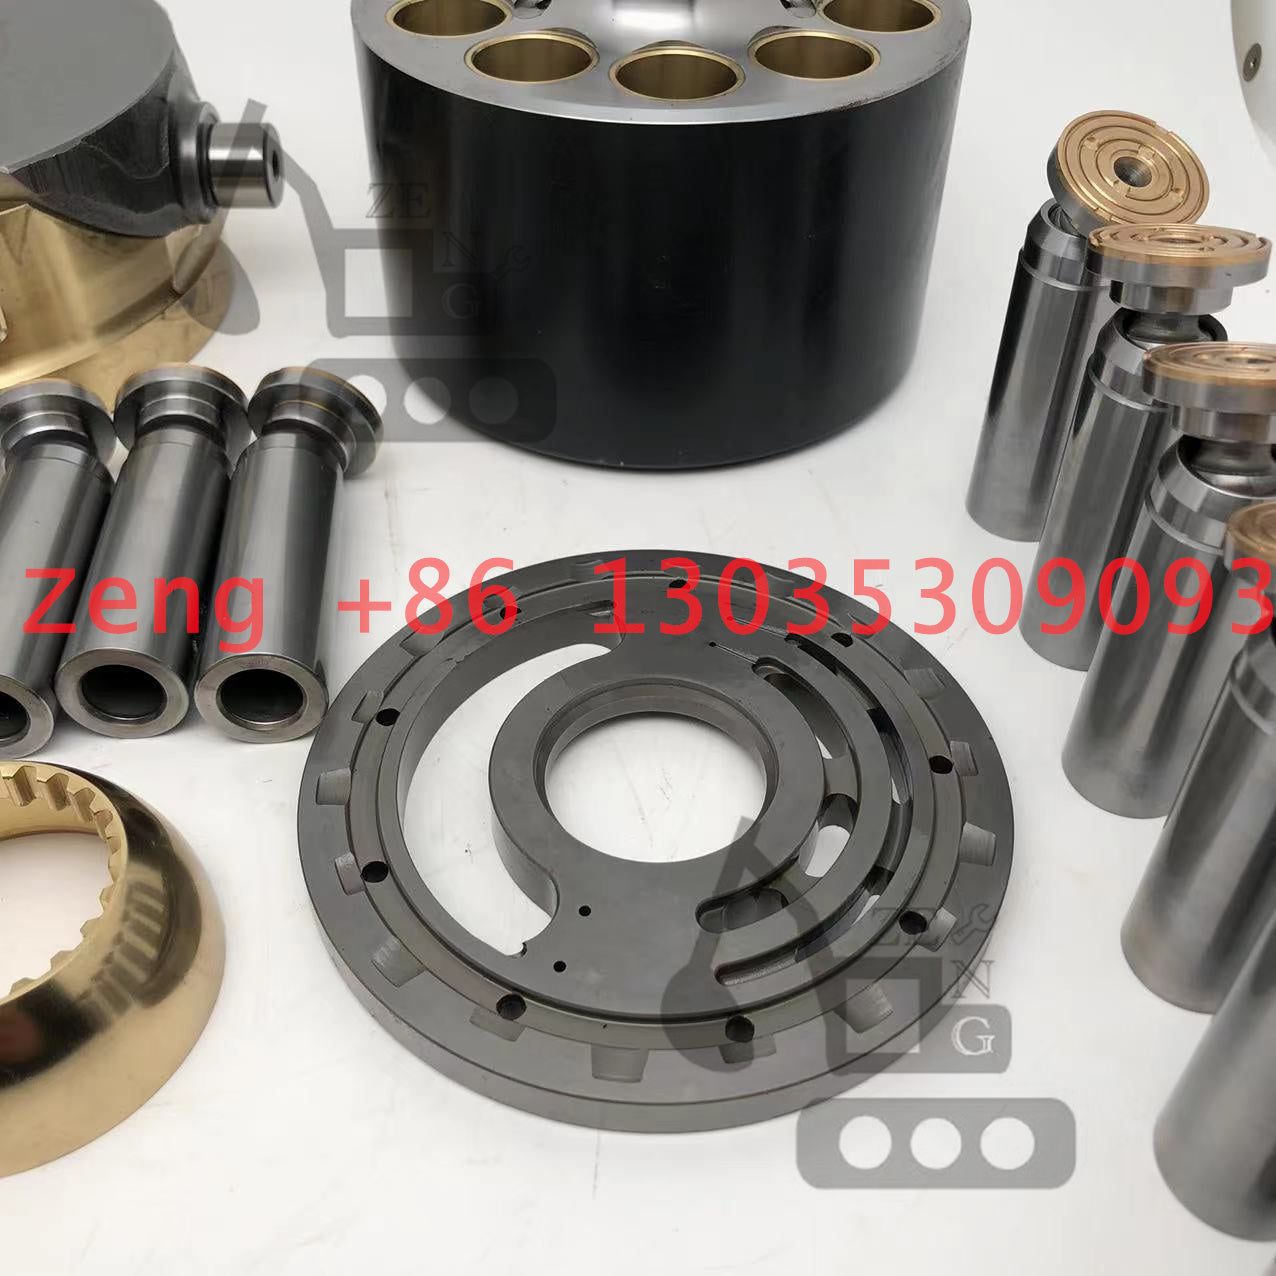 Komatsu HPD56 LPD56 hydraulic pump rotory group and spare parts for PC120-8 PC128UU-6 PC130-8 PC138-8 excavator